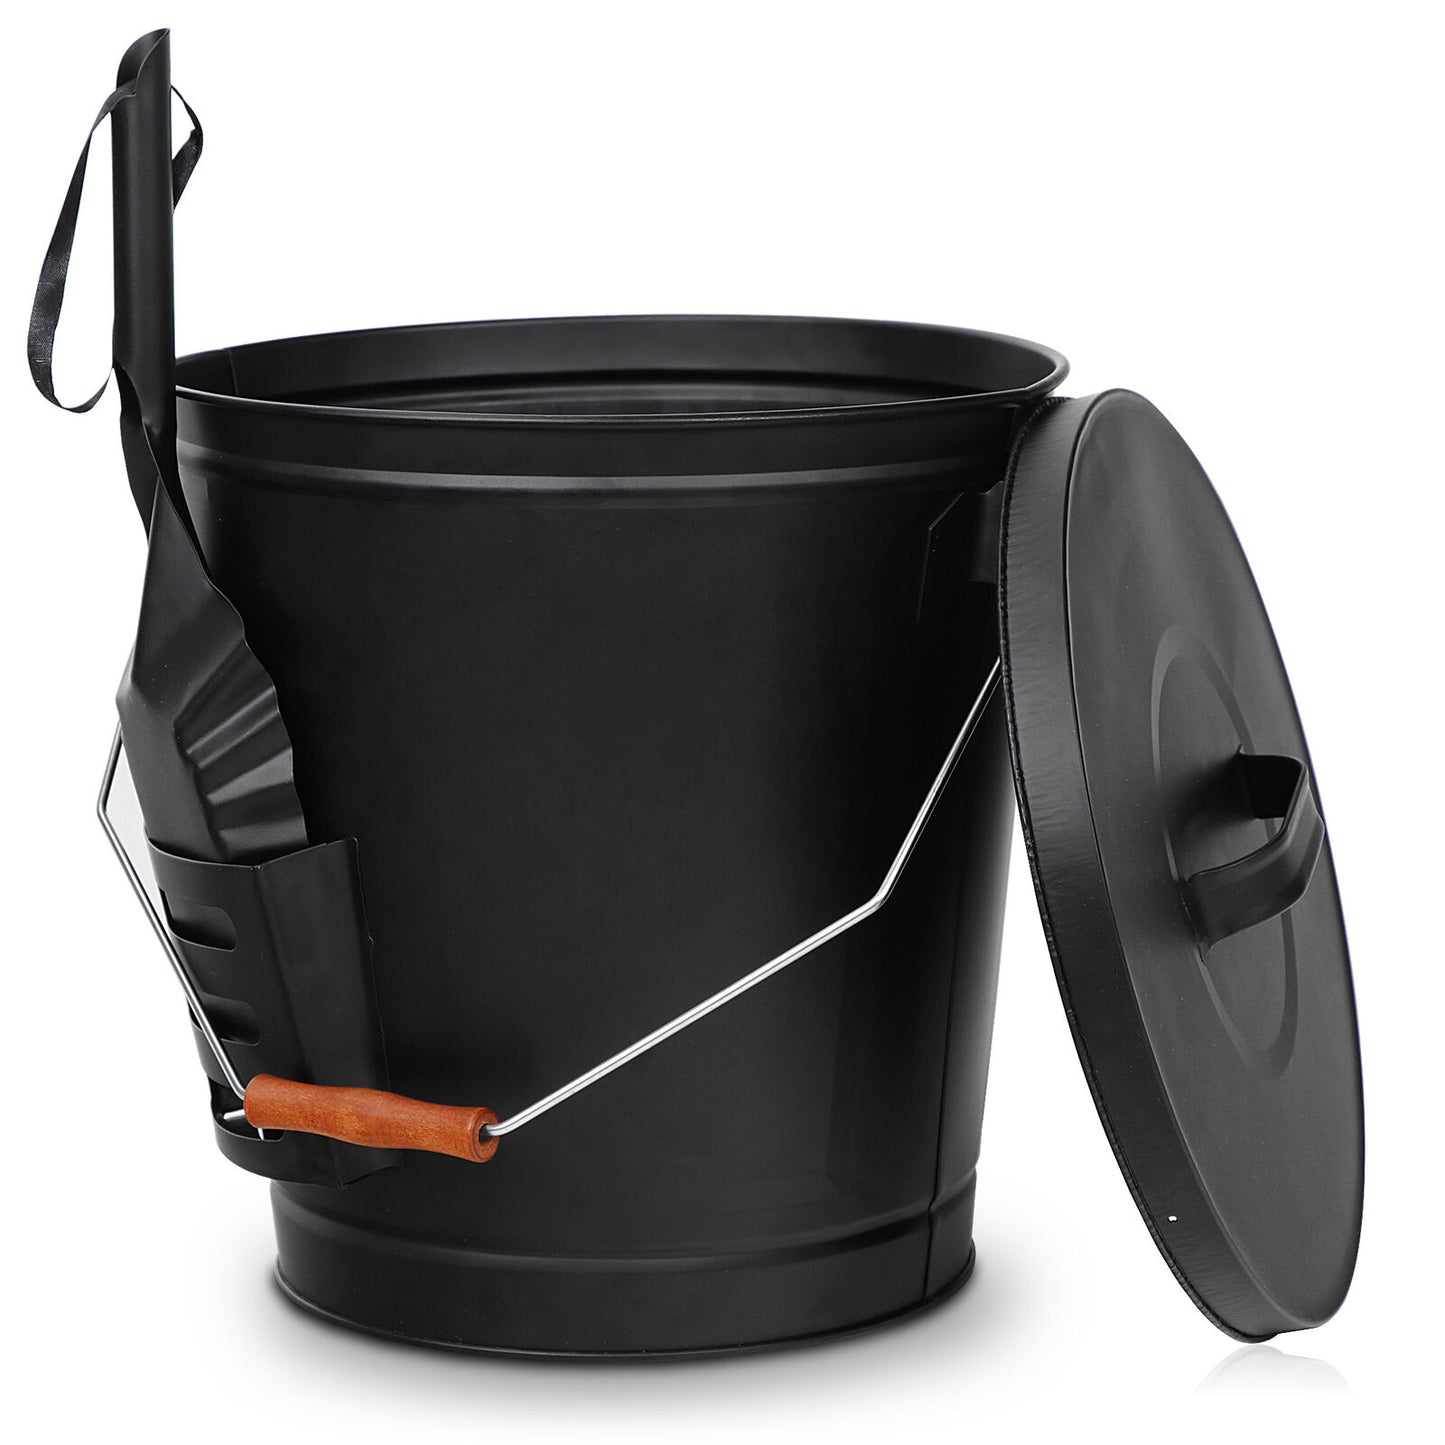 Black Metal Fireplace Ash Bucket With Shovel Lid Cover Fire Pits Stove Sturdy